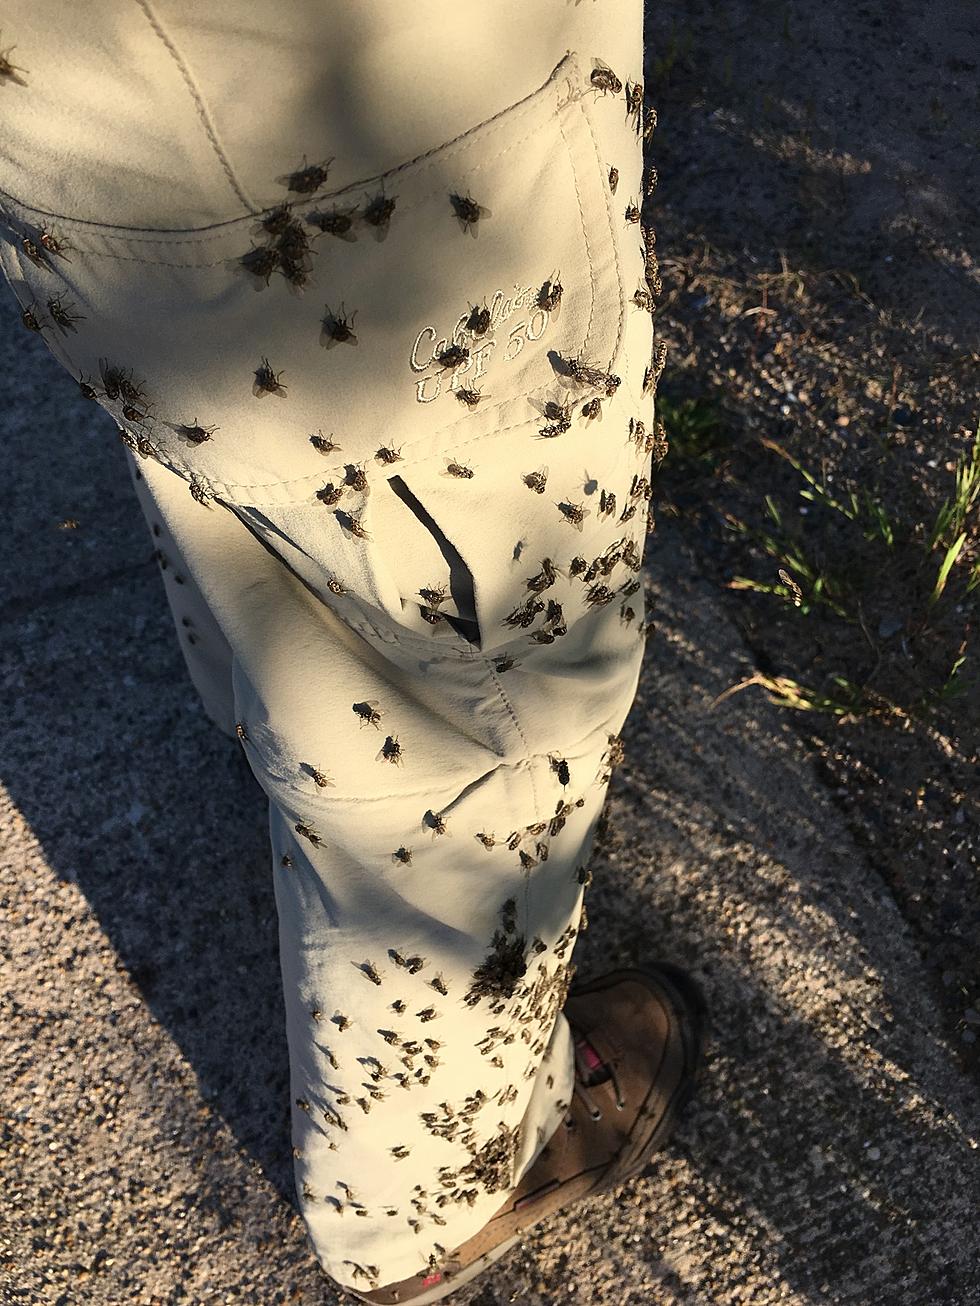 Bug Infested Photo from Michigan’s Pictured Rocks Will Make You Itchy All Over